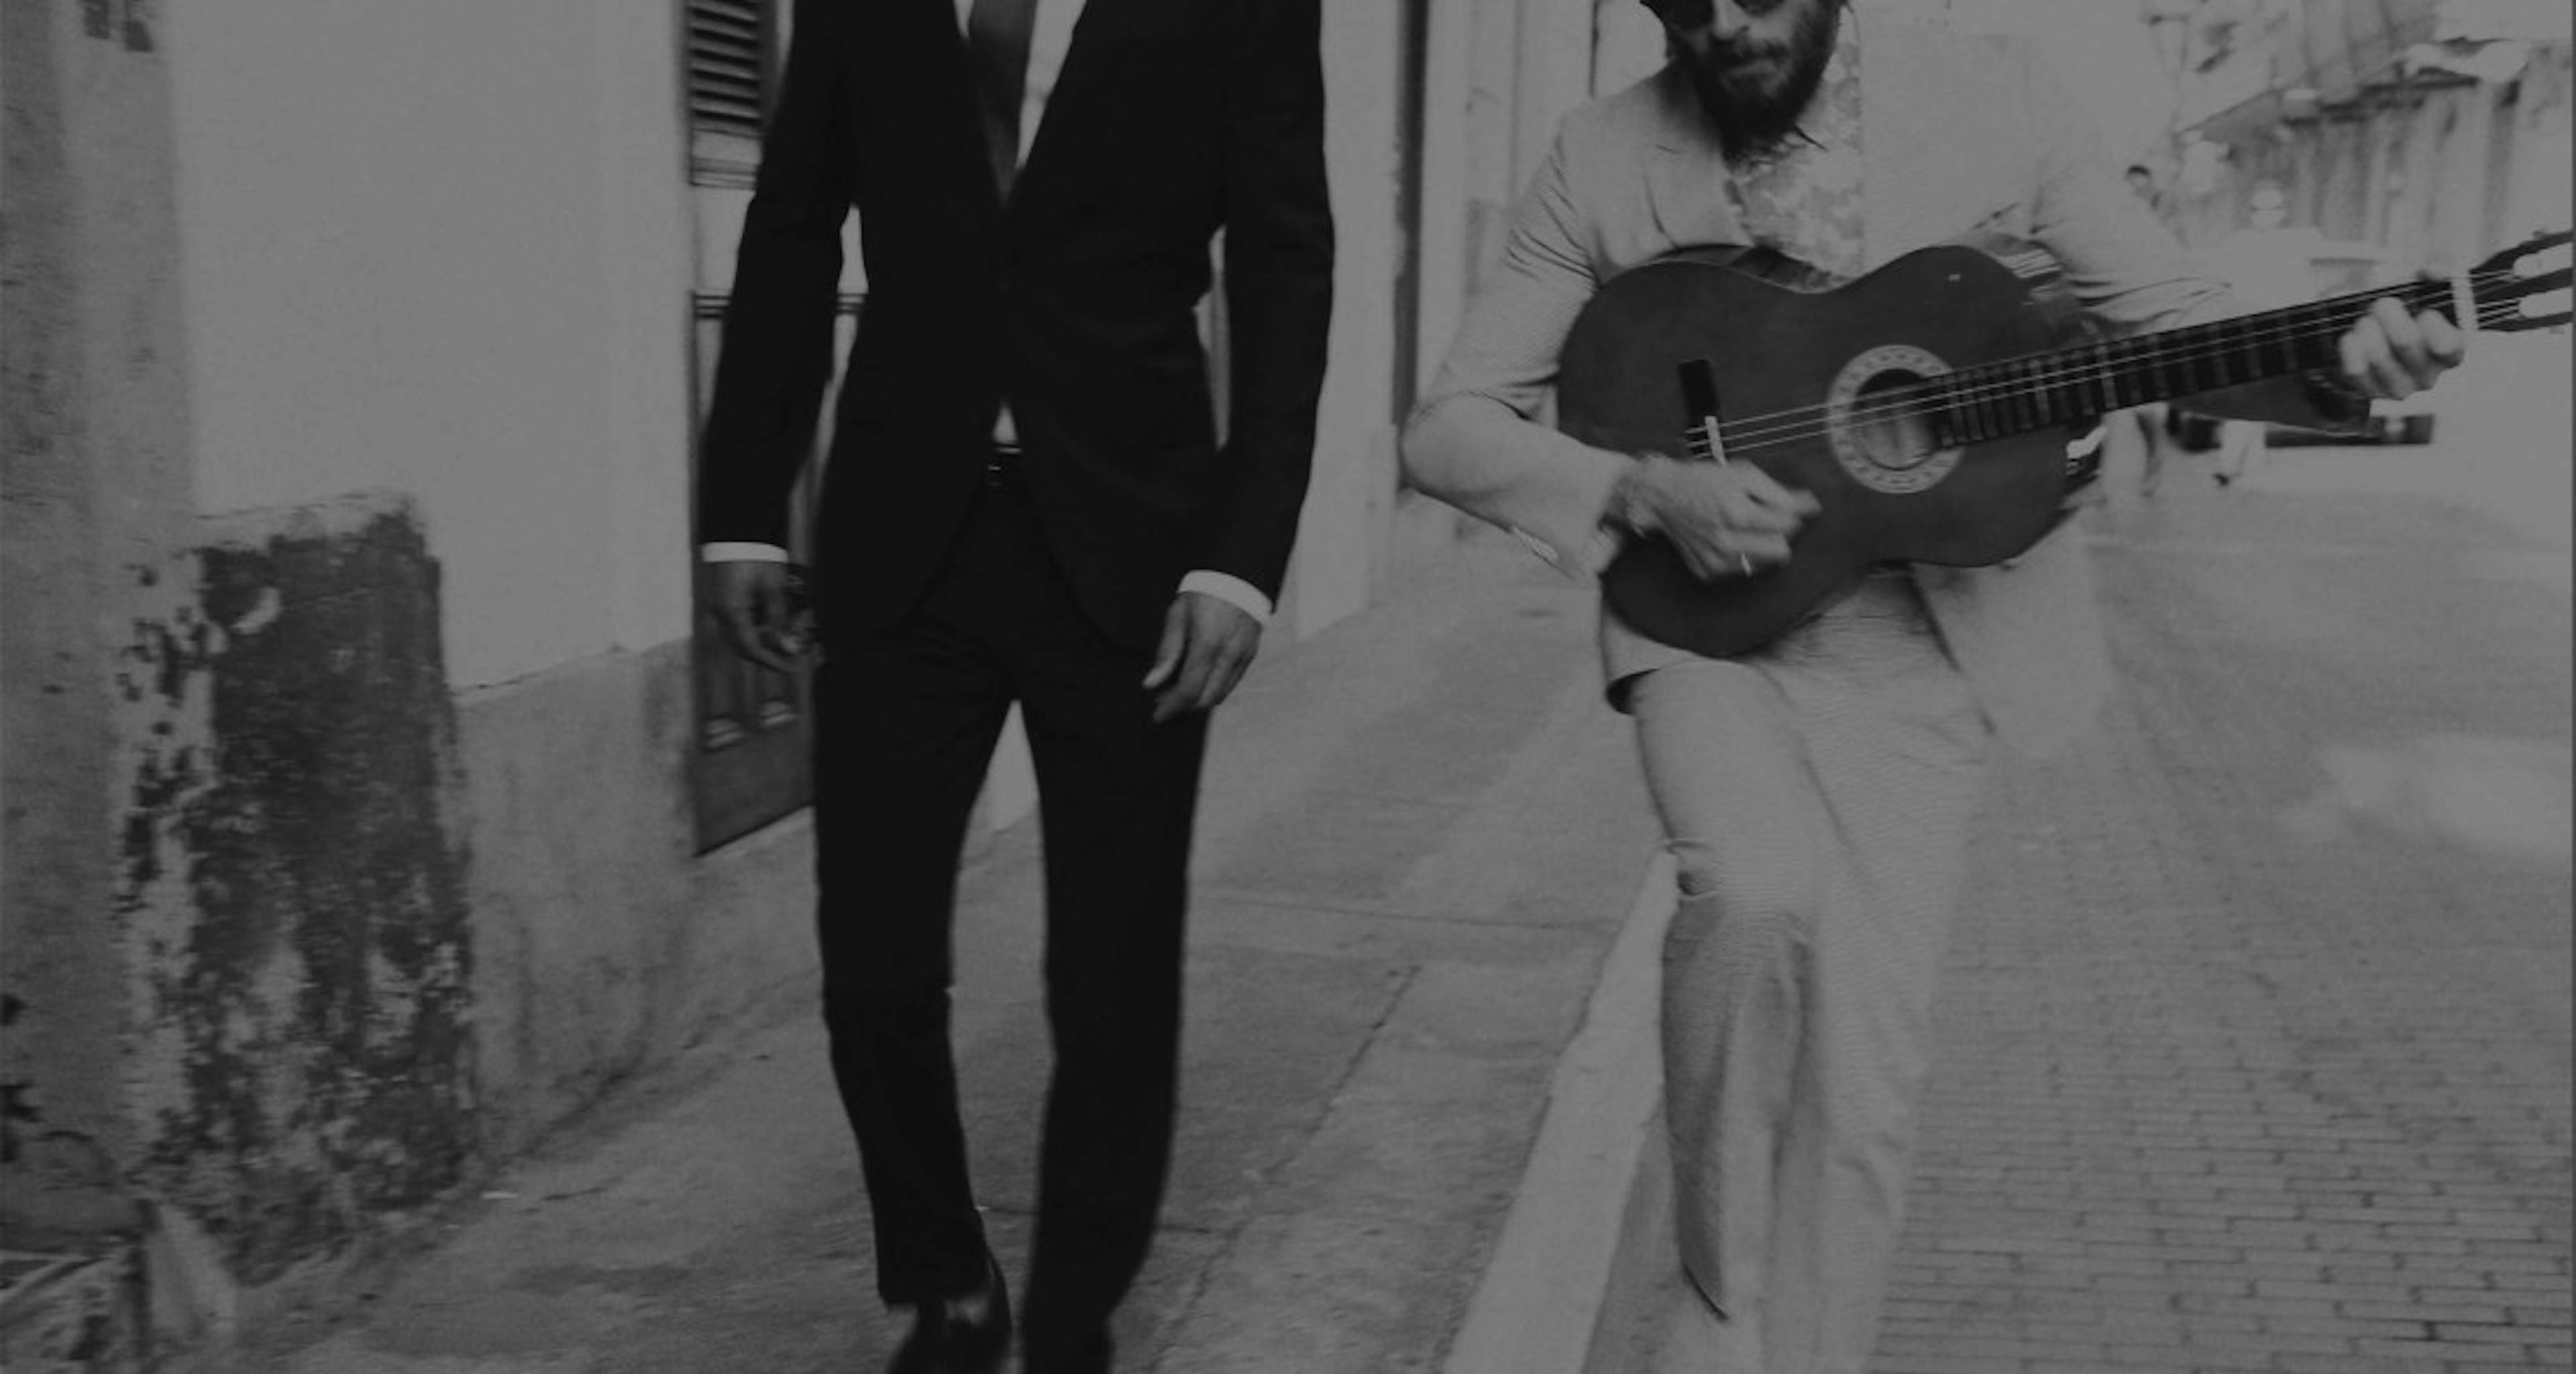 Image of 2 men in suits walking down the block, man on the right has a guitar.